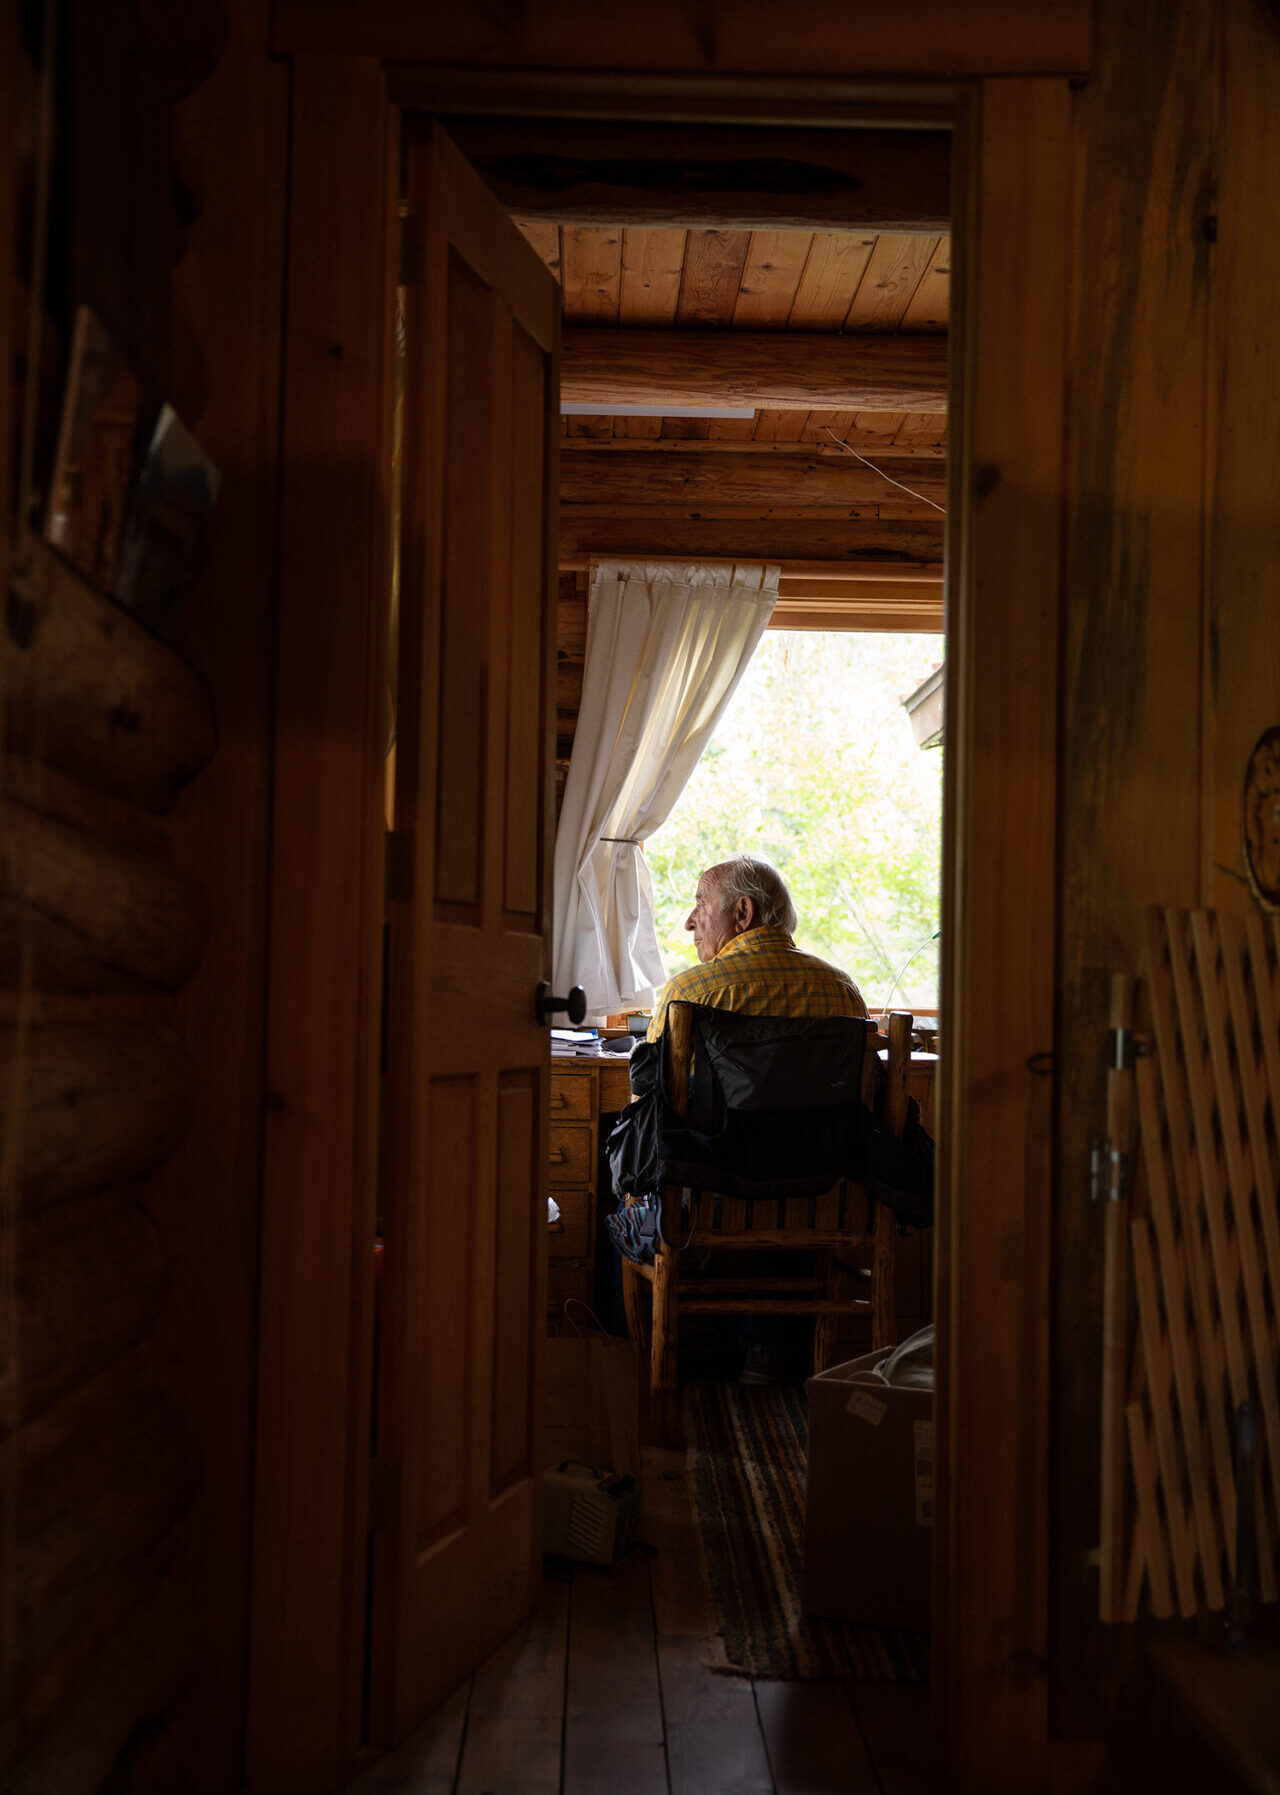 Patagonia founder Yvon Chouinard looks out of a window in a darkened room